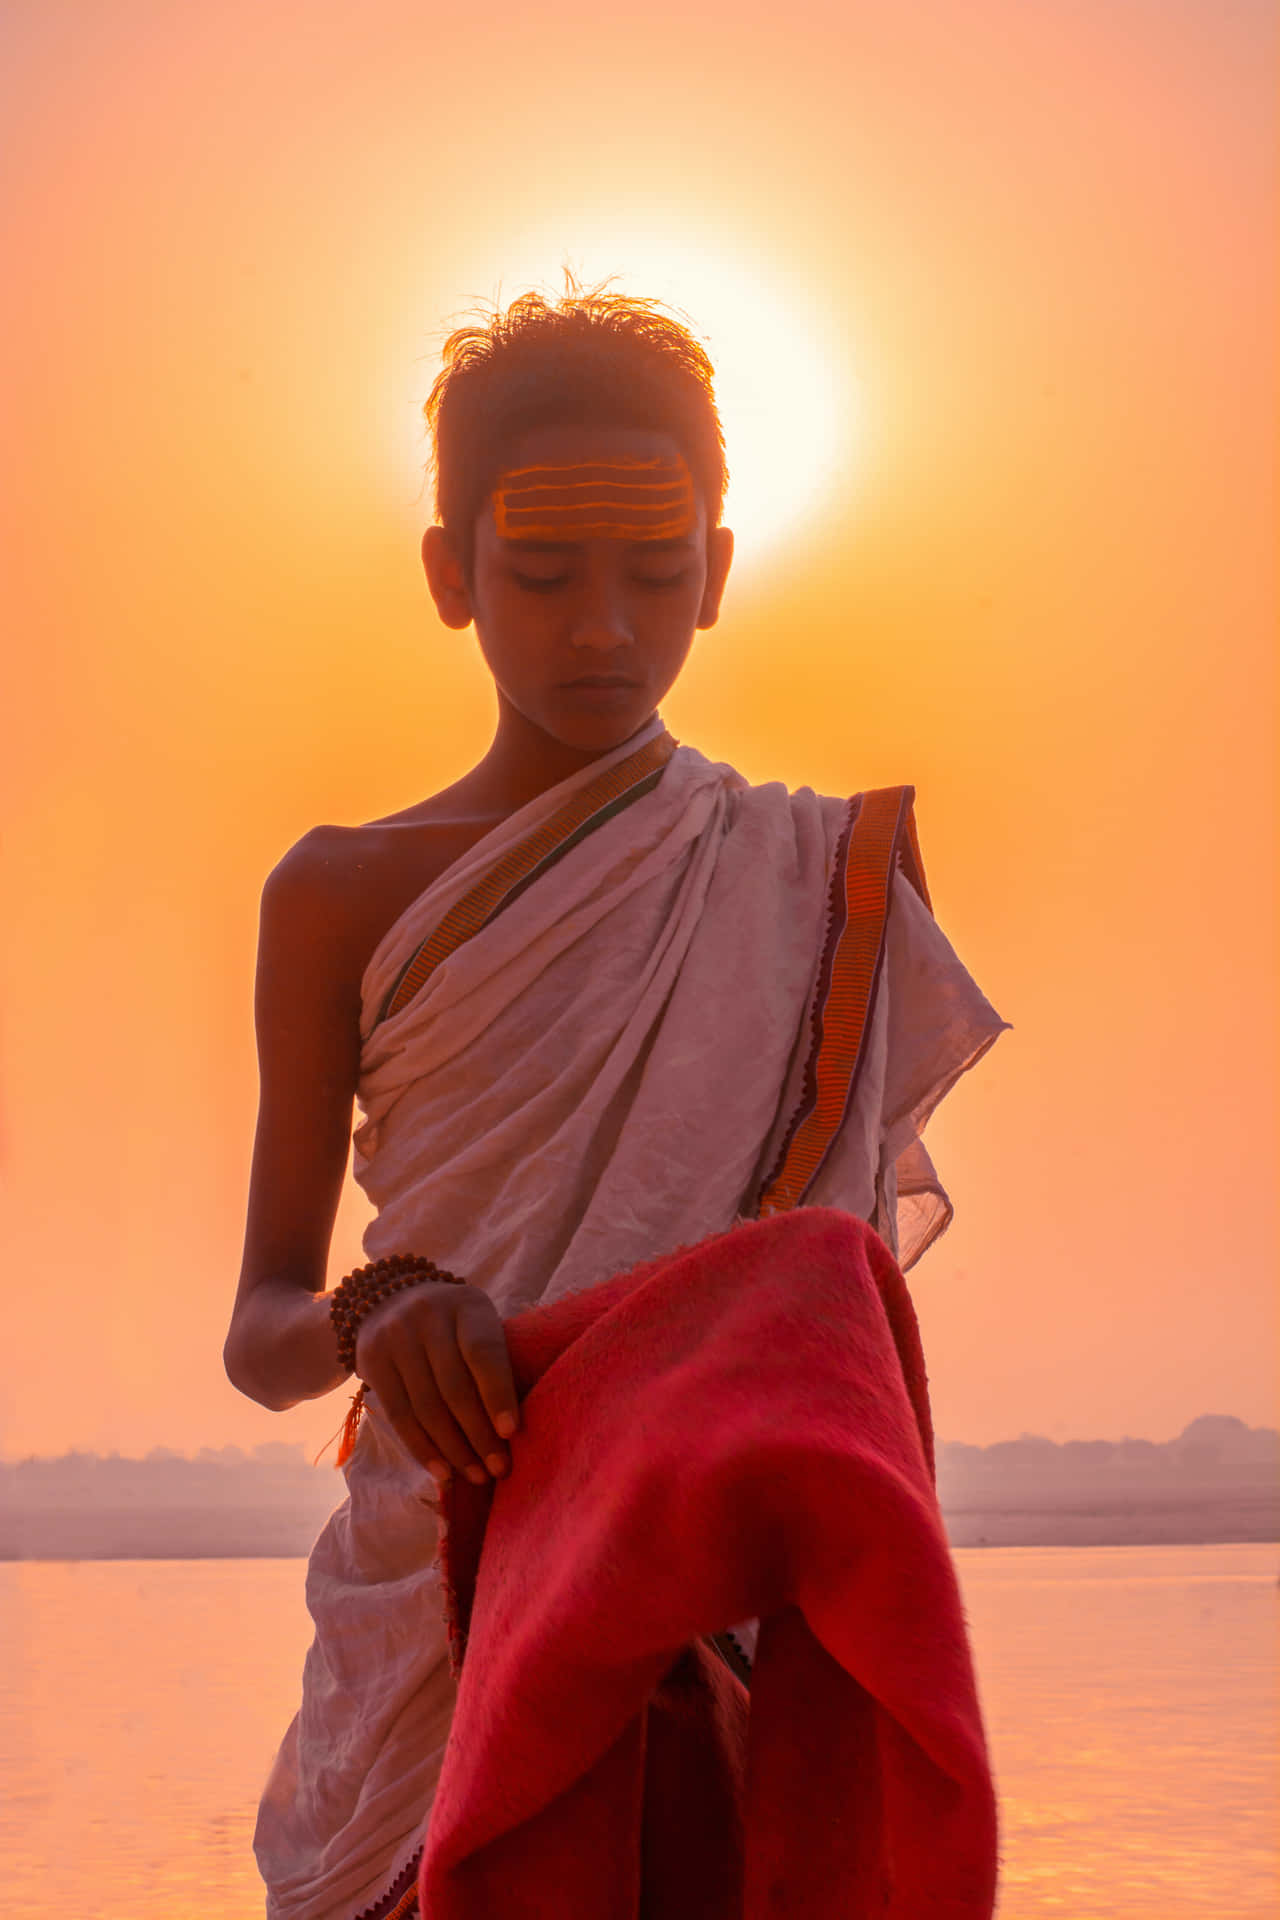 "Curious Young Indian Boy Exploring the Fields"